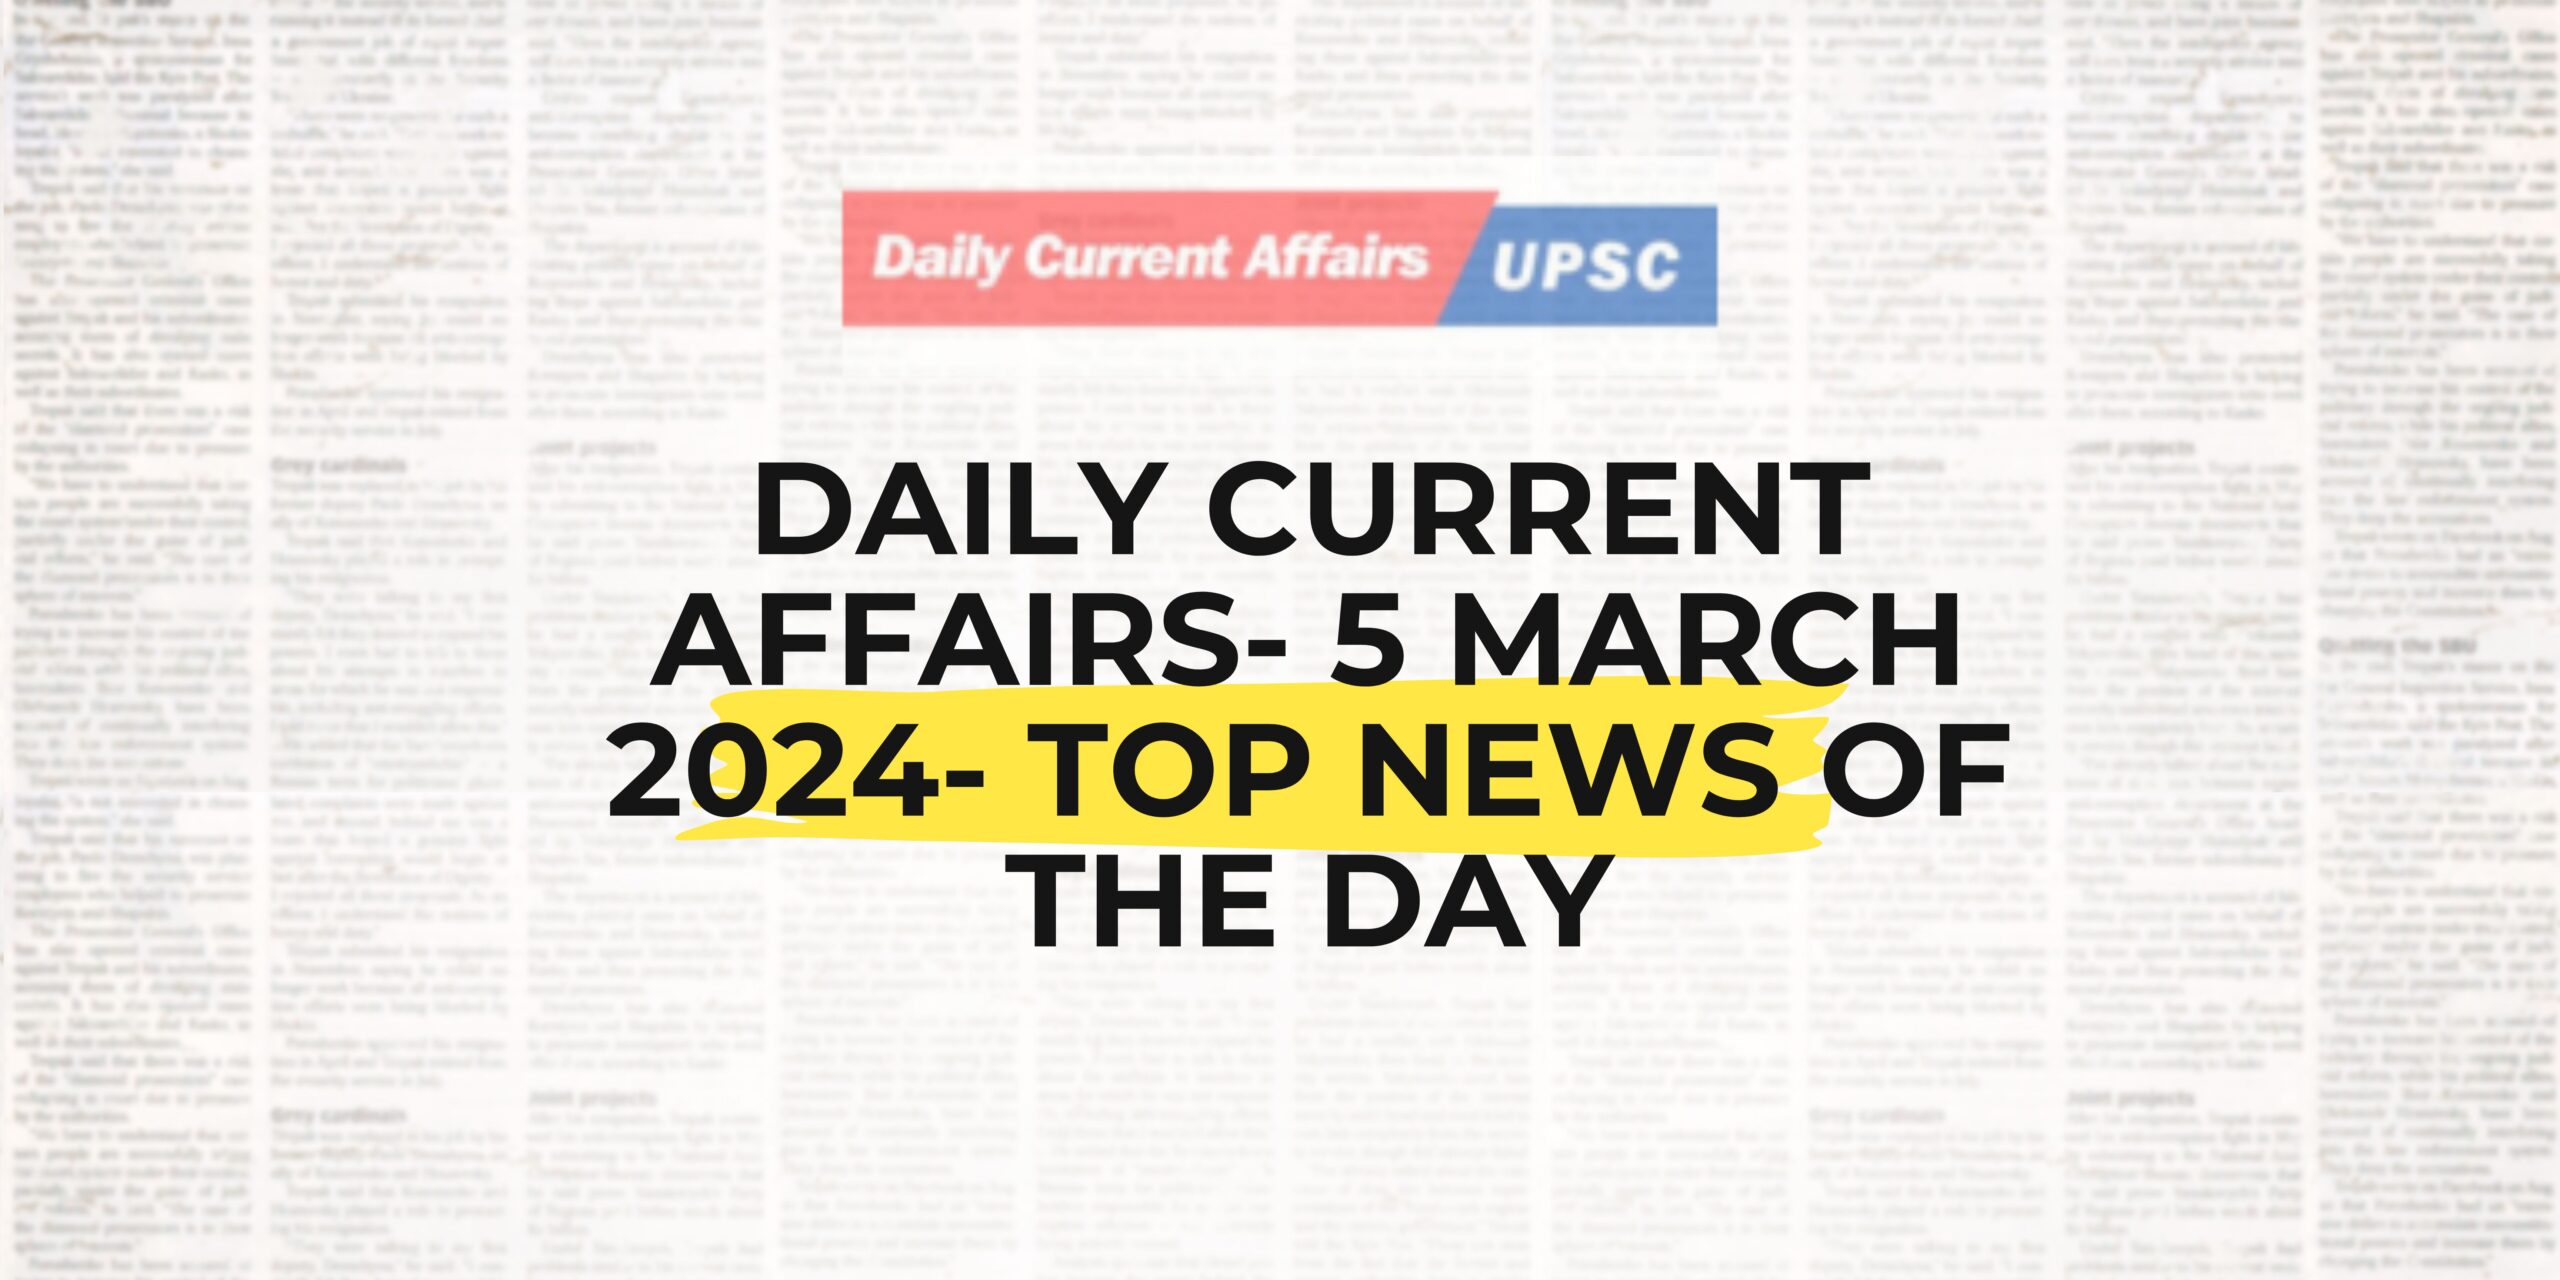 Daily Current Affairs 5 March 2024- Top News Of The Day